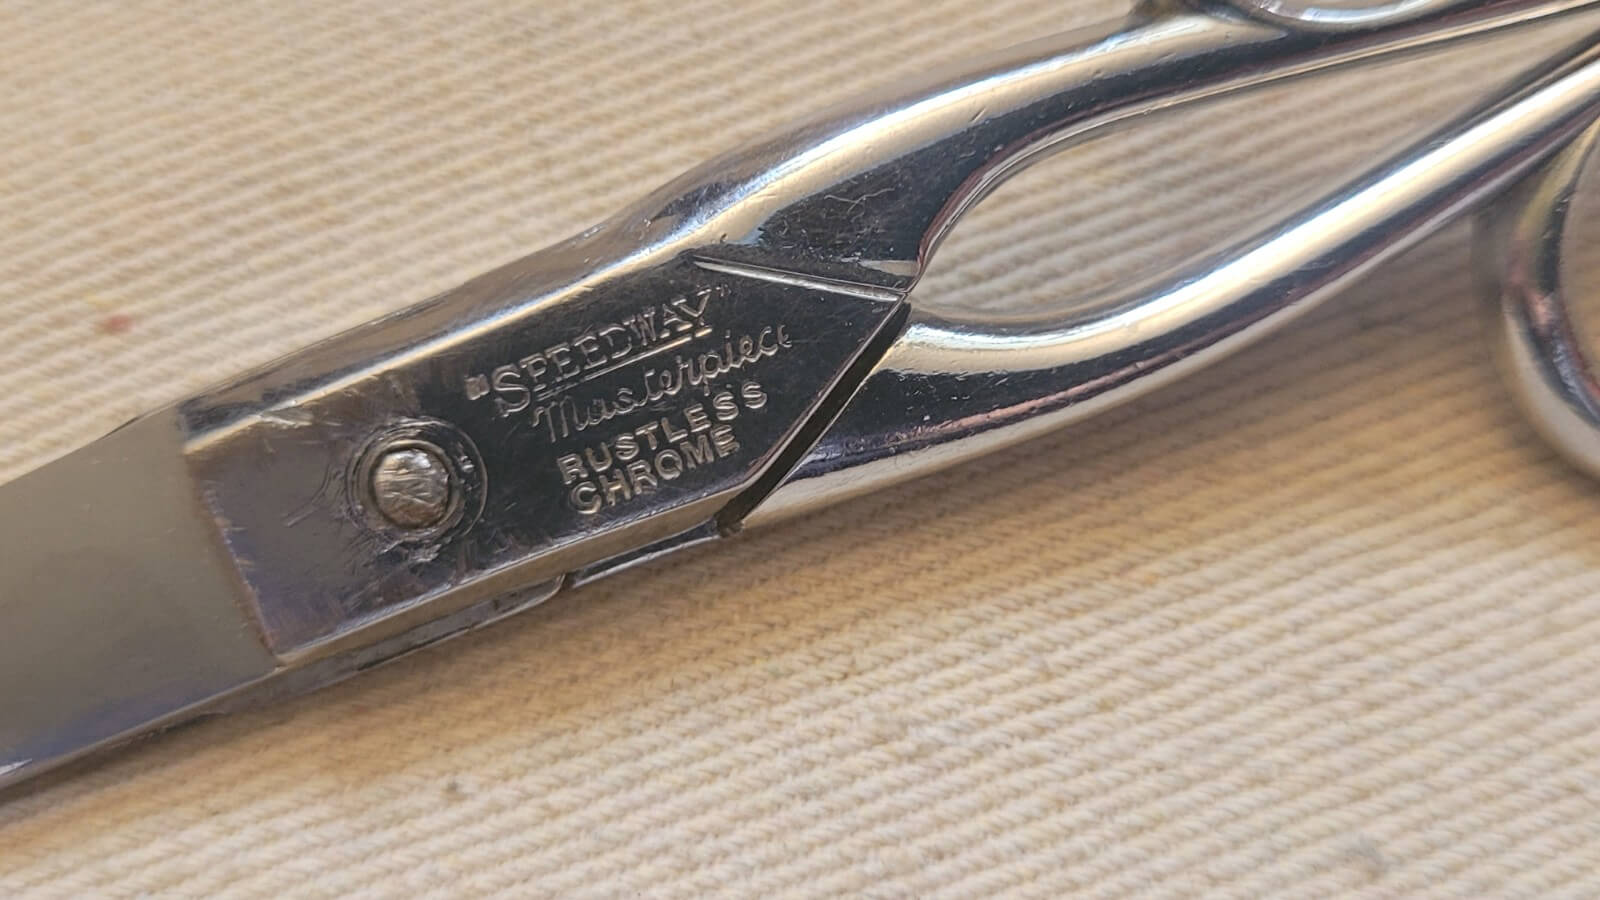 richards-speedway-masterpiece-rustless-chrome-scissors-shears=made-in-shefield-england-sewing-and-upholstery-antique-tools